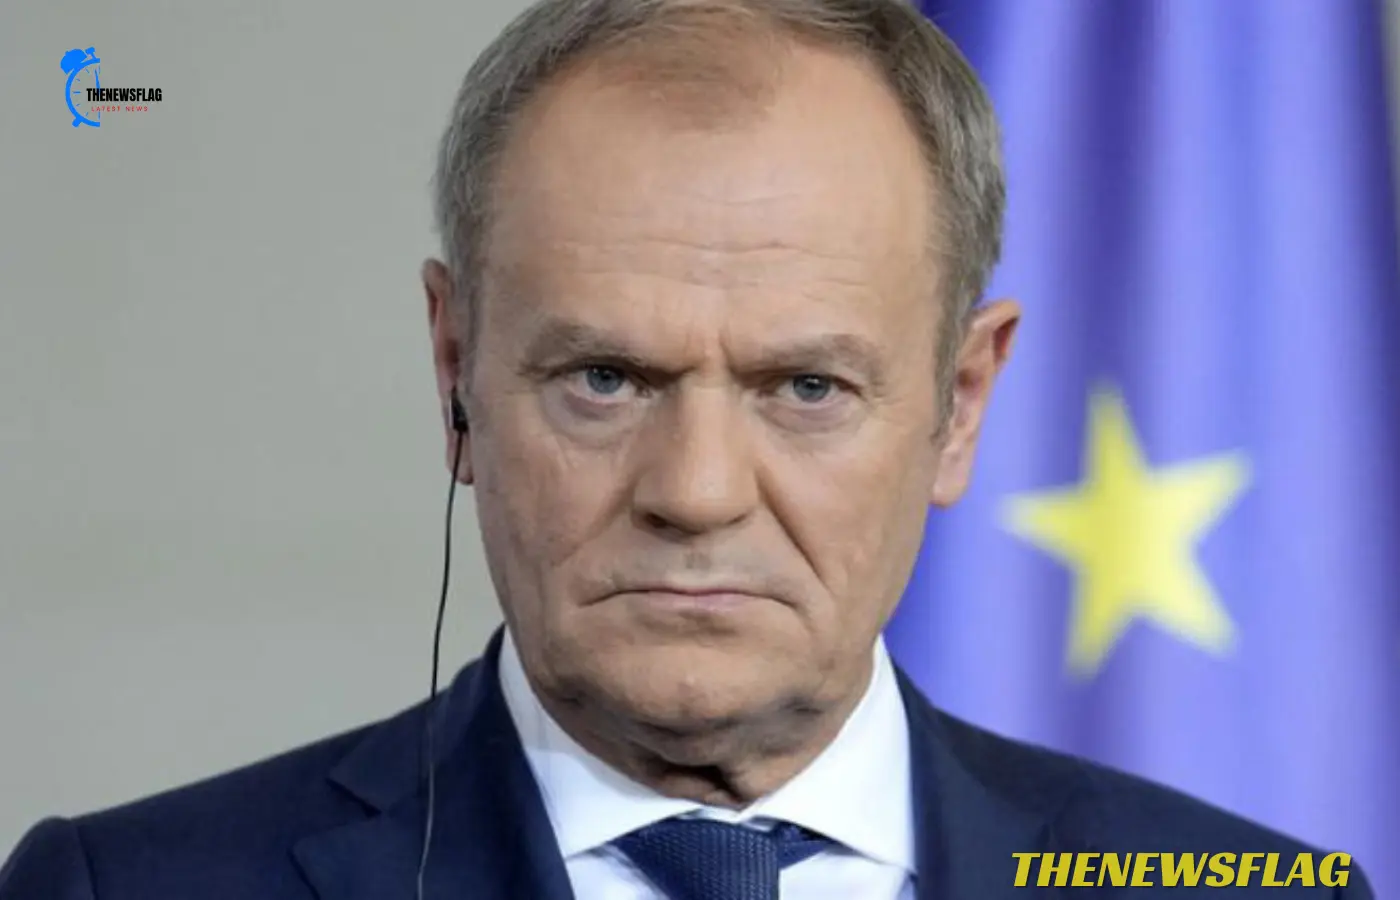 Donald Tusk, the prime minister of Poland, calls war in Europe "a real threat."